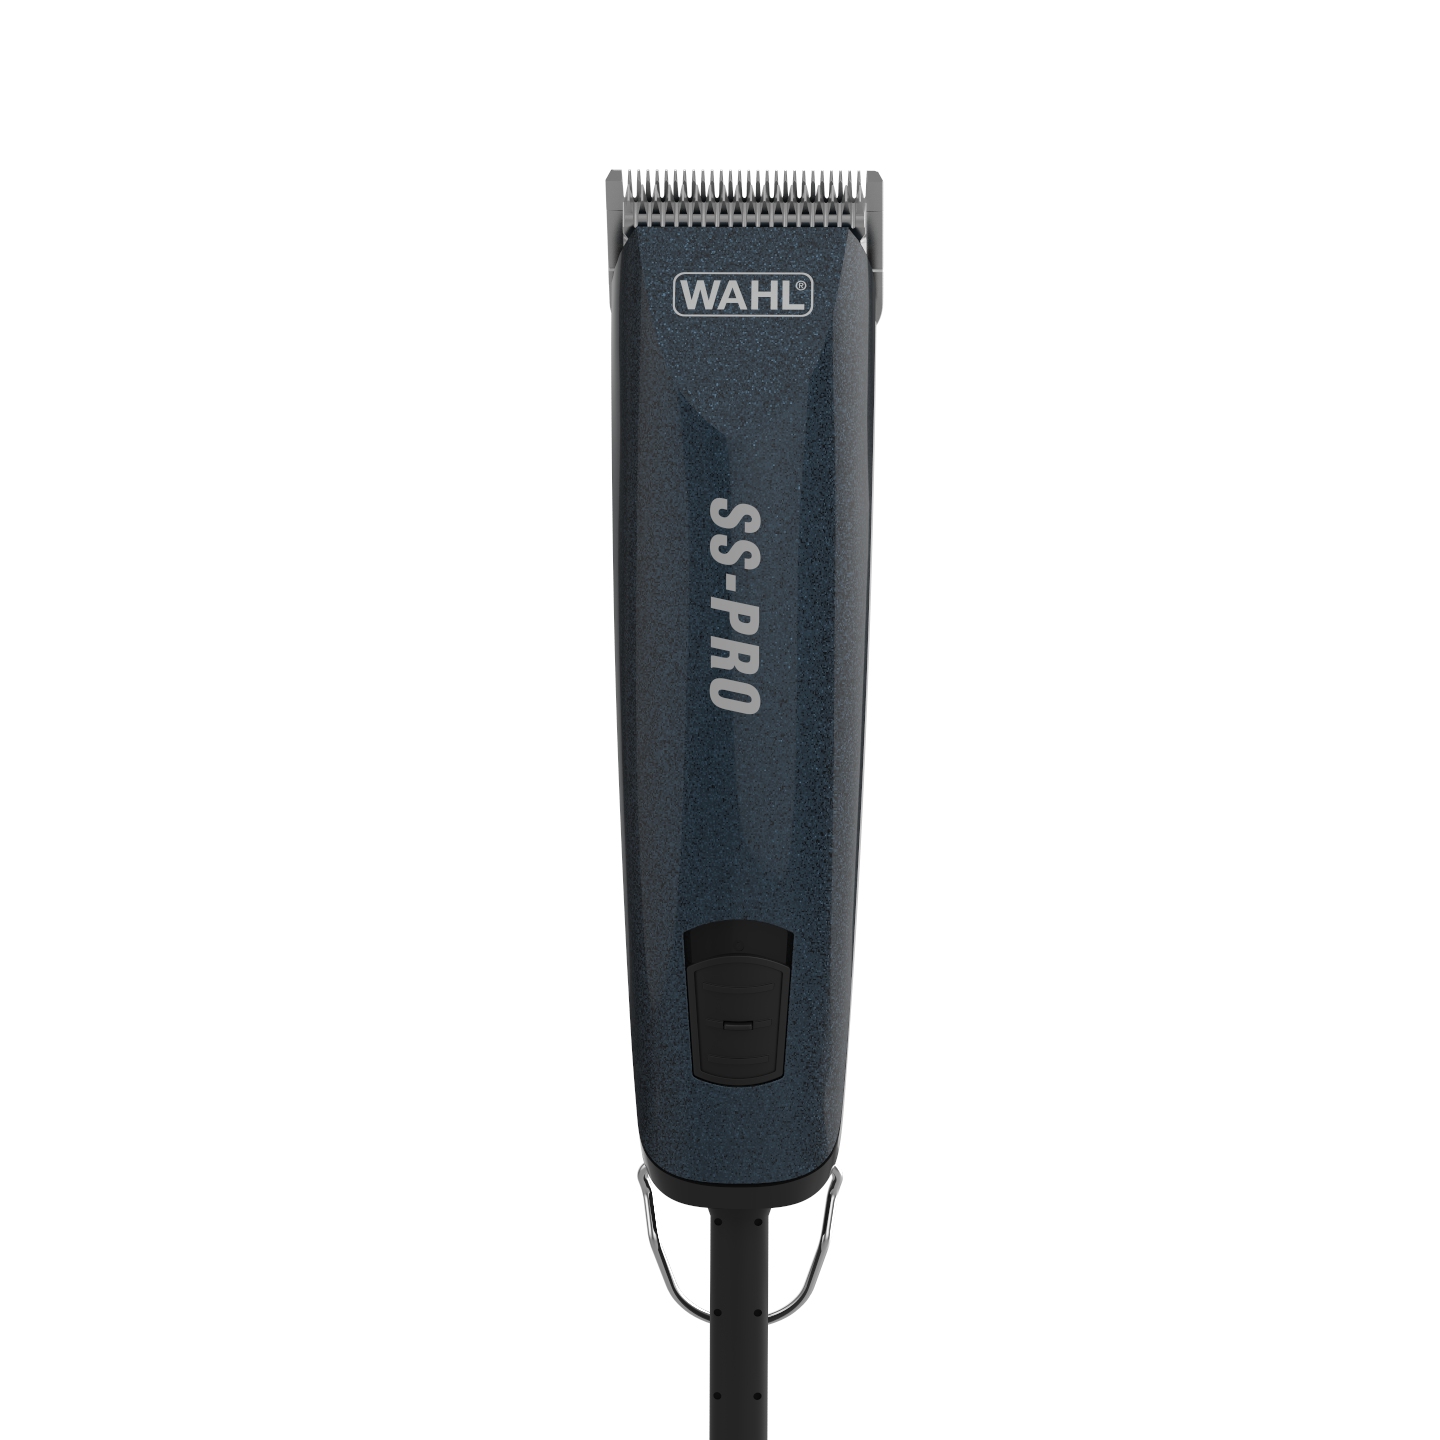 wahl combination dog clipper and trimmer set